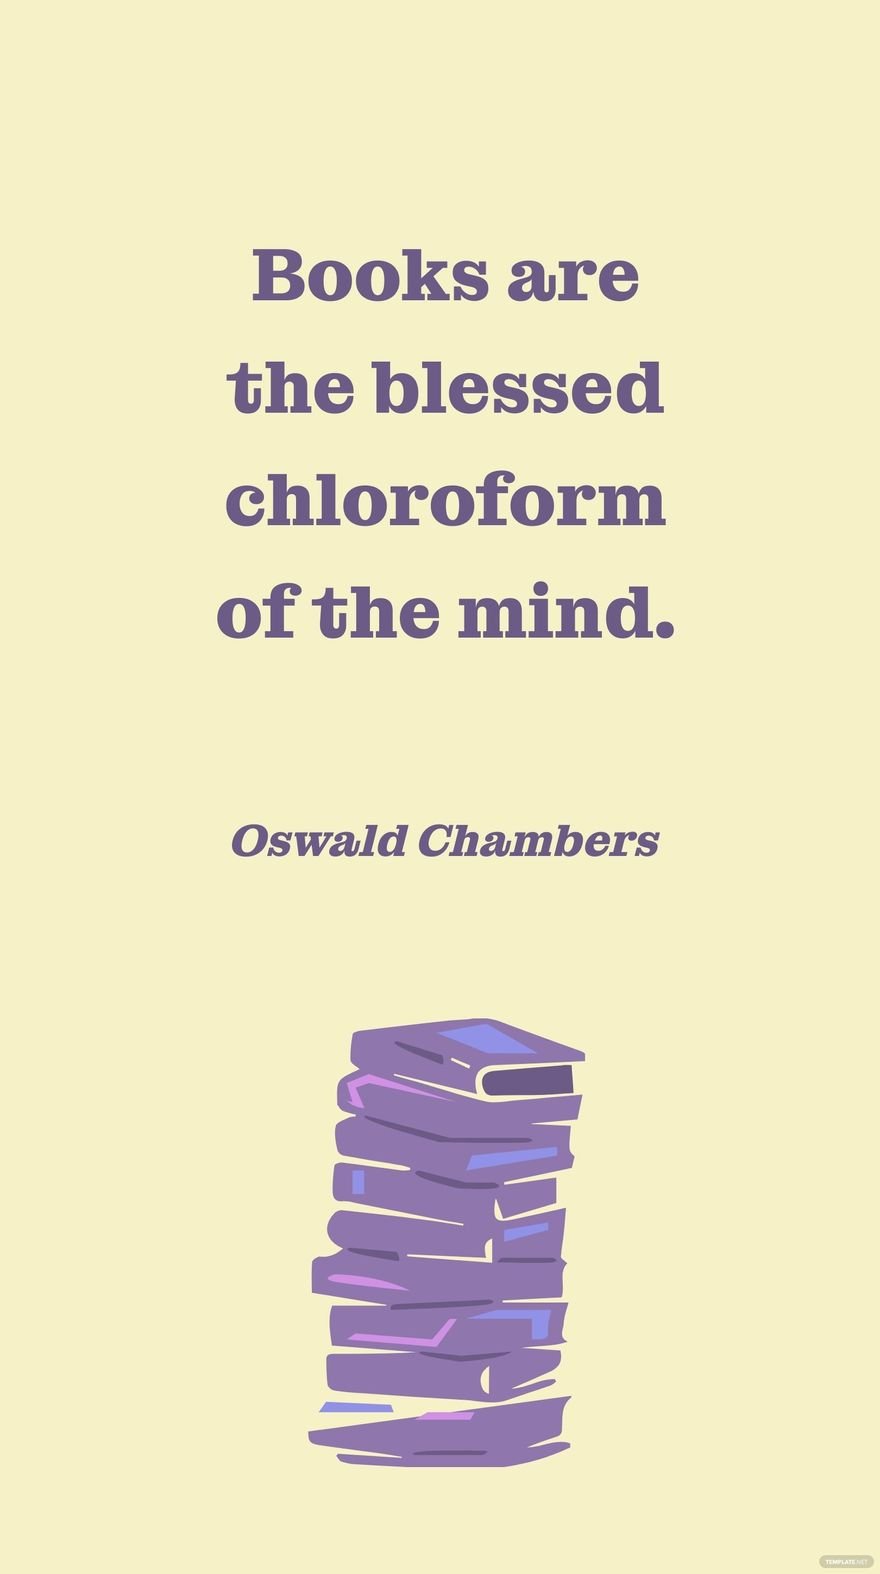 Free Oswald Chambers - Books are the blessed chloroform of the mind. in JPG